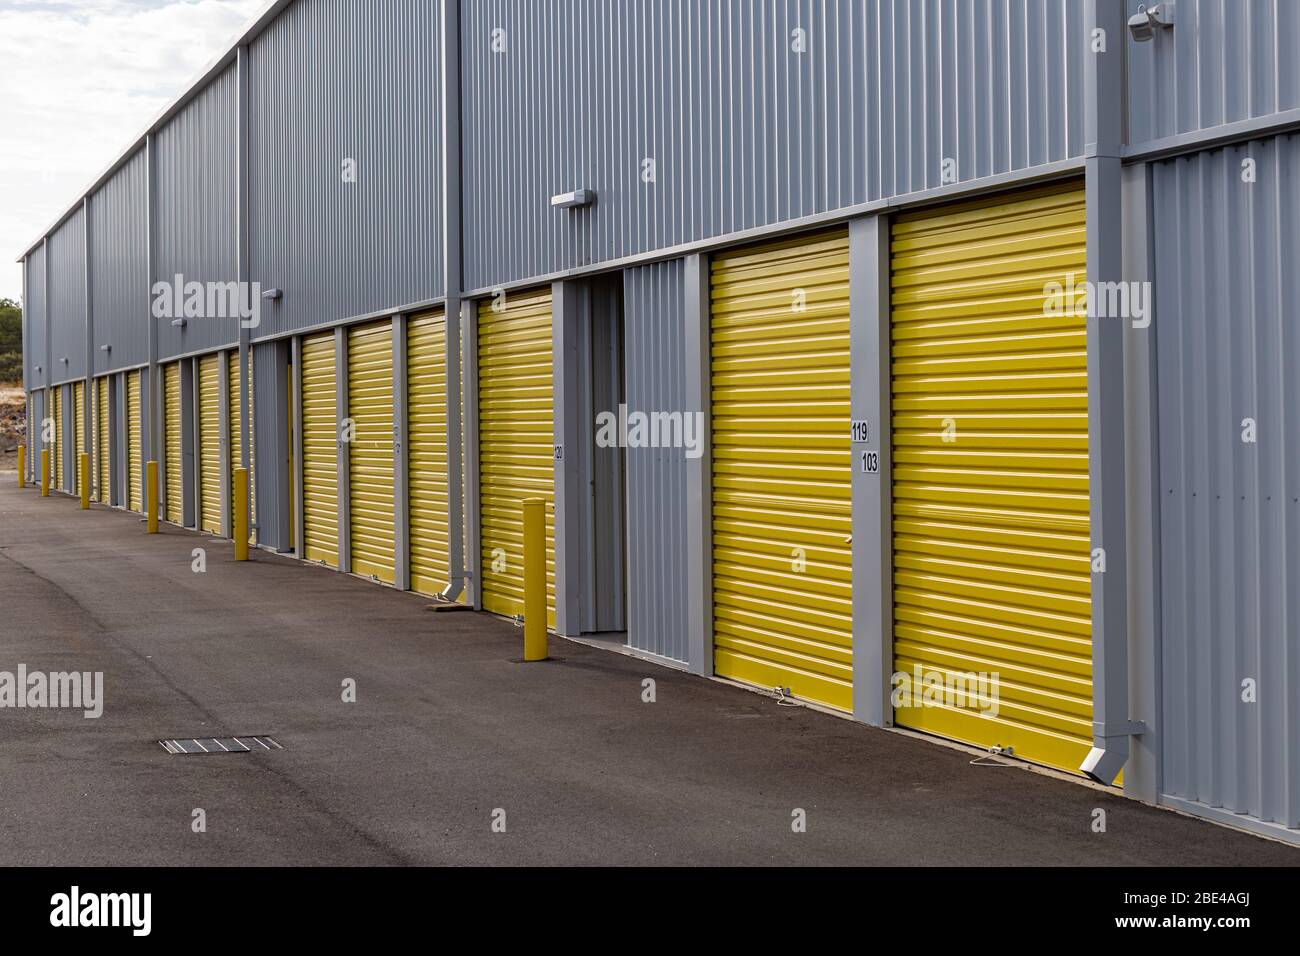 Modern goods storage facility with yellow roller doors and steel or metal building Stock Photo